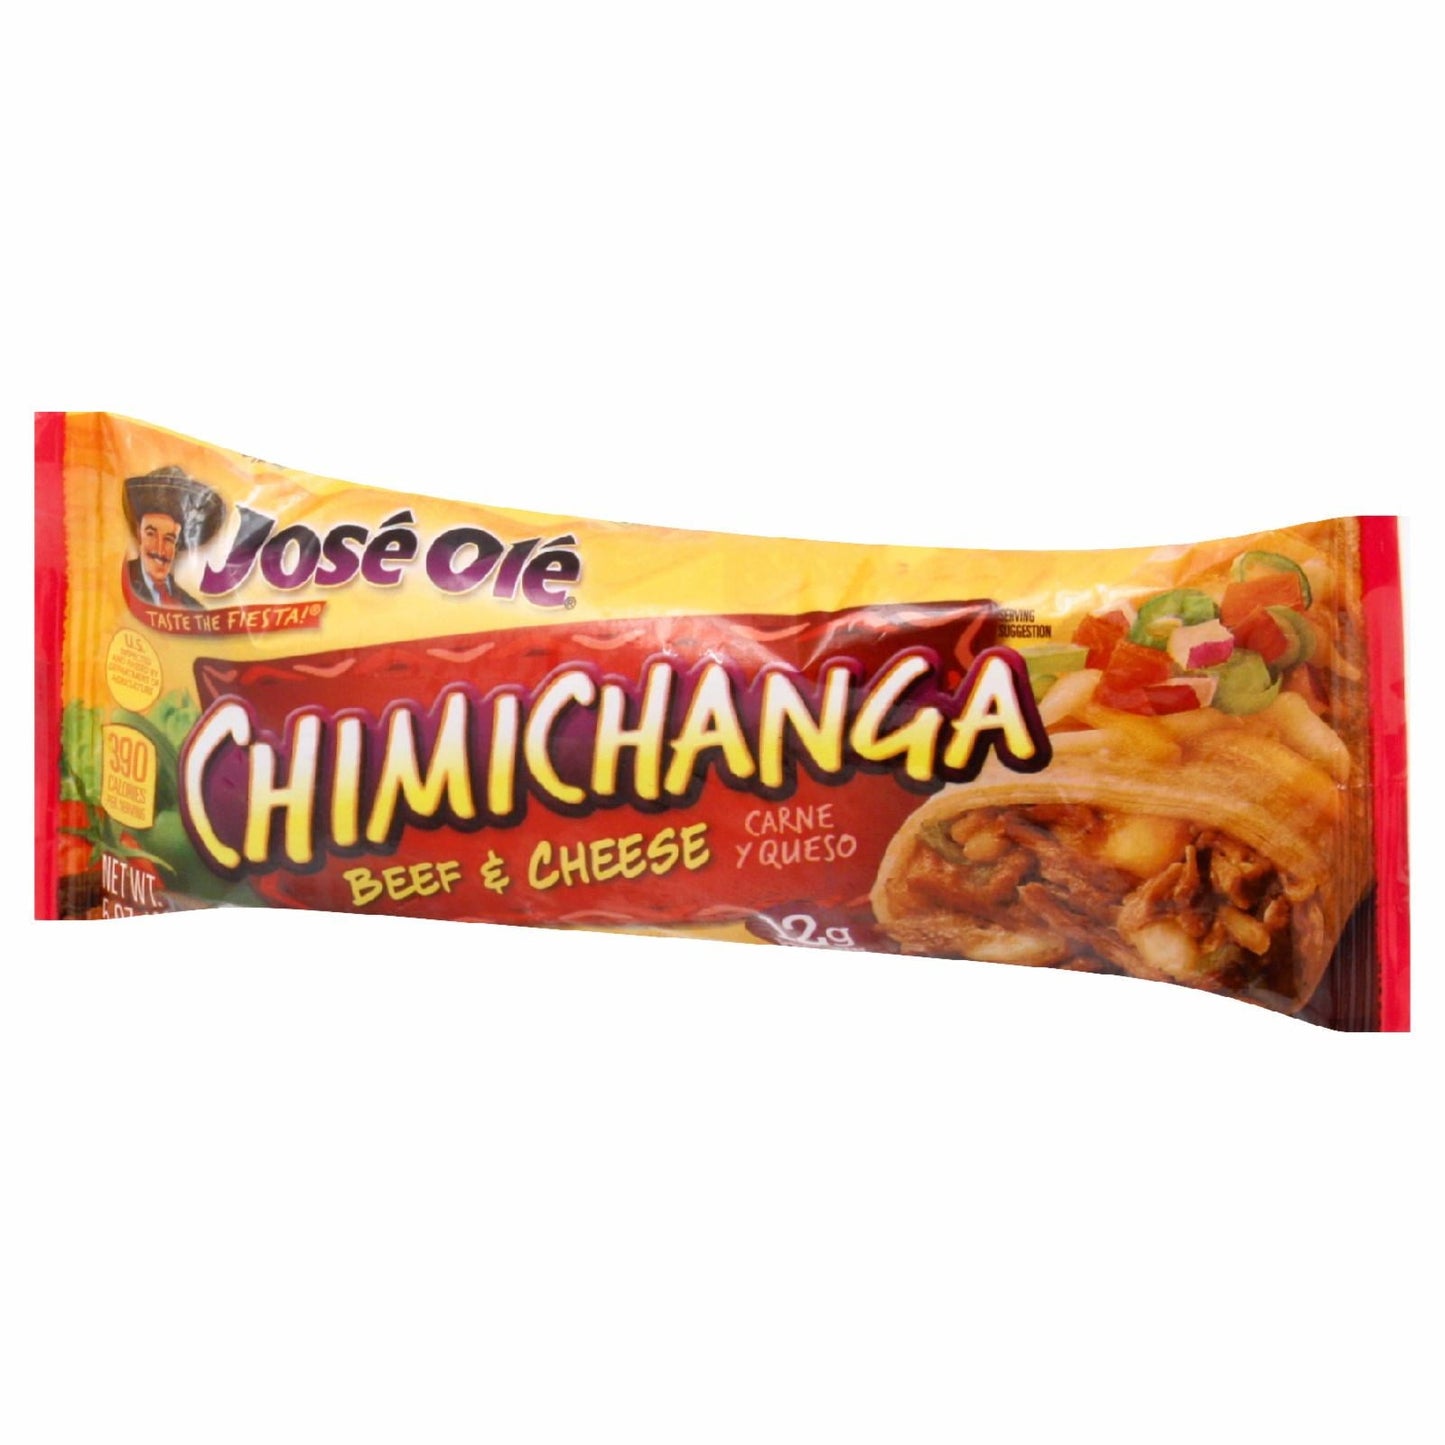 José Olé Individually Wrapped Beef & Cheese Chimichanga, 5 oz (Frozen)